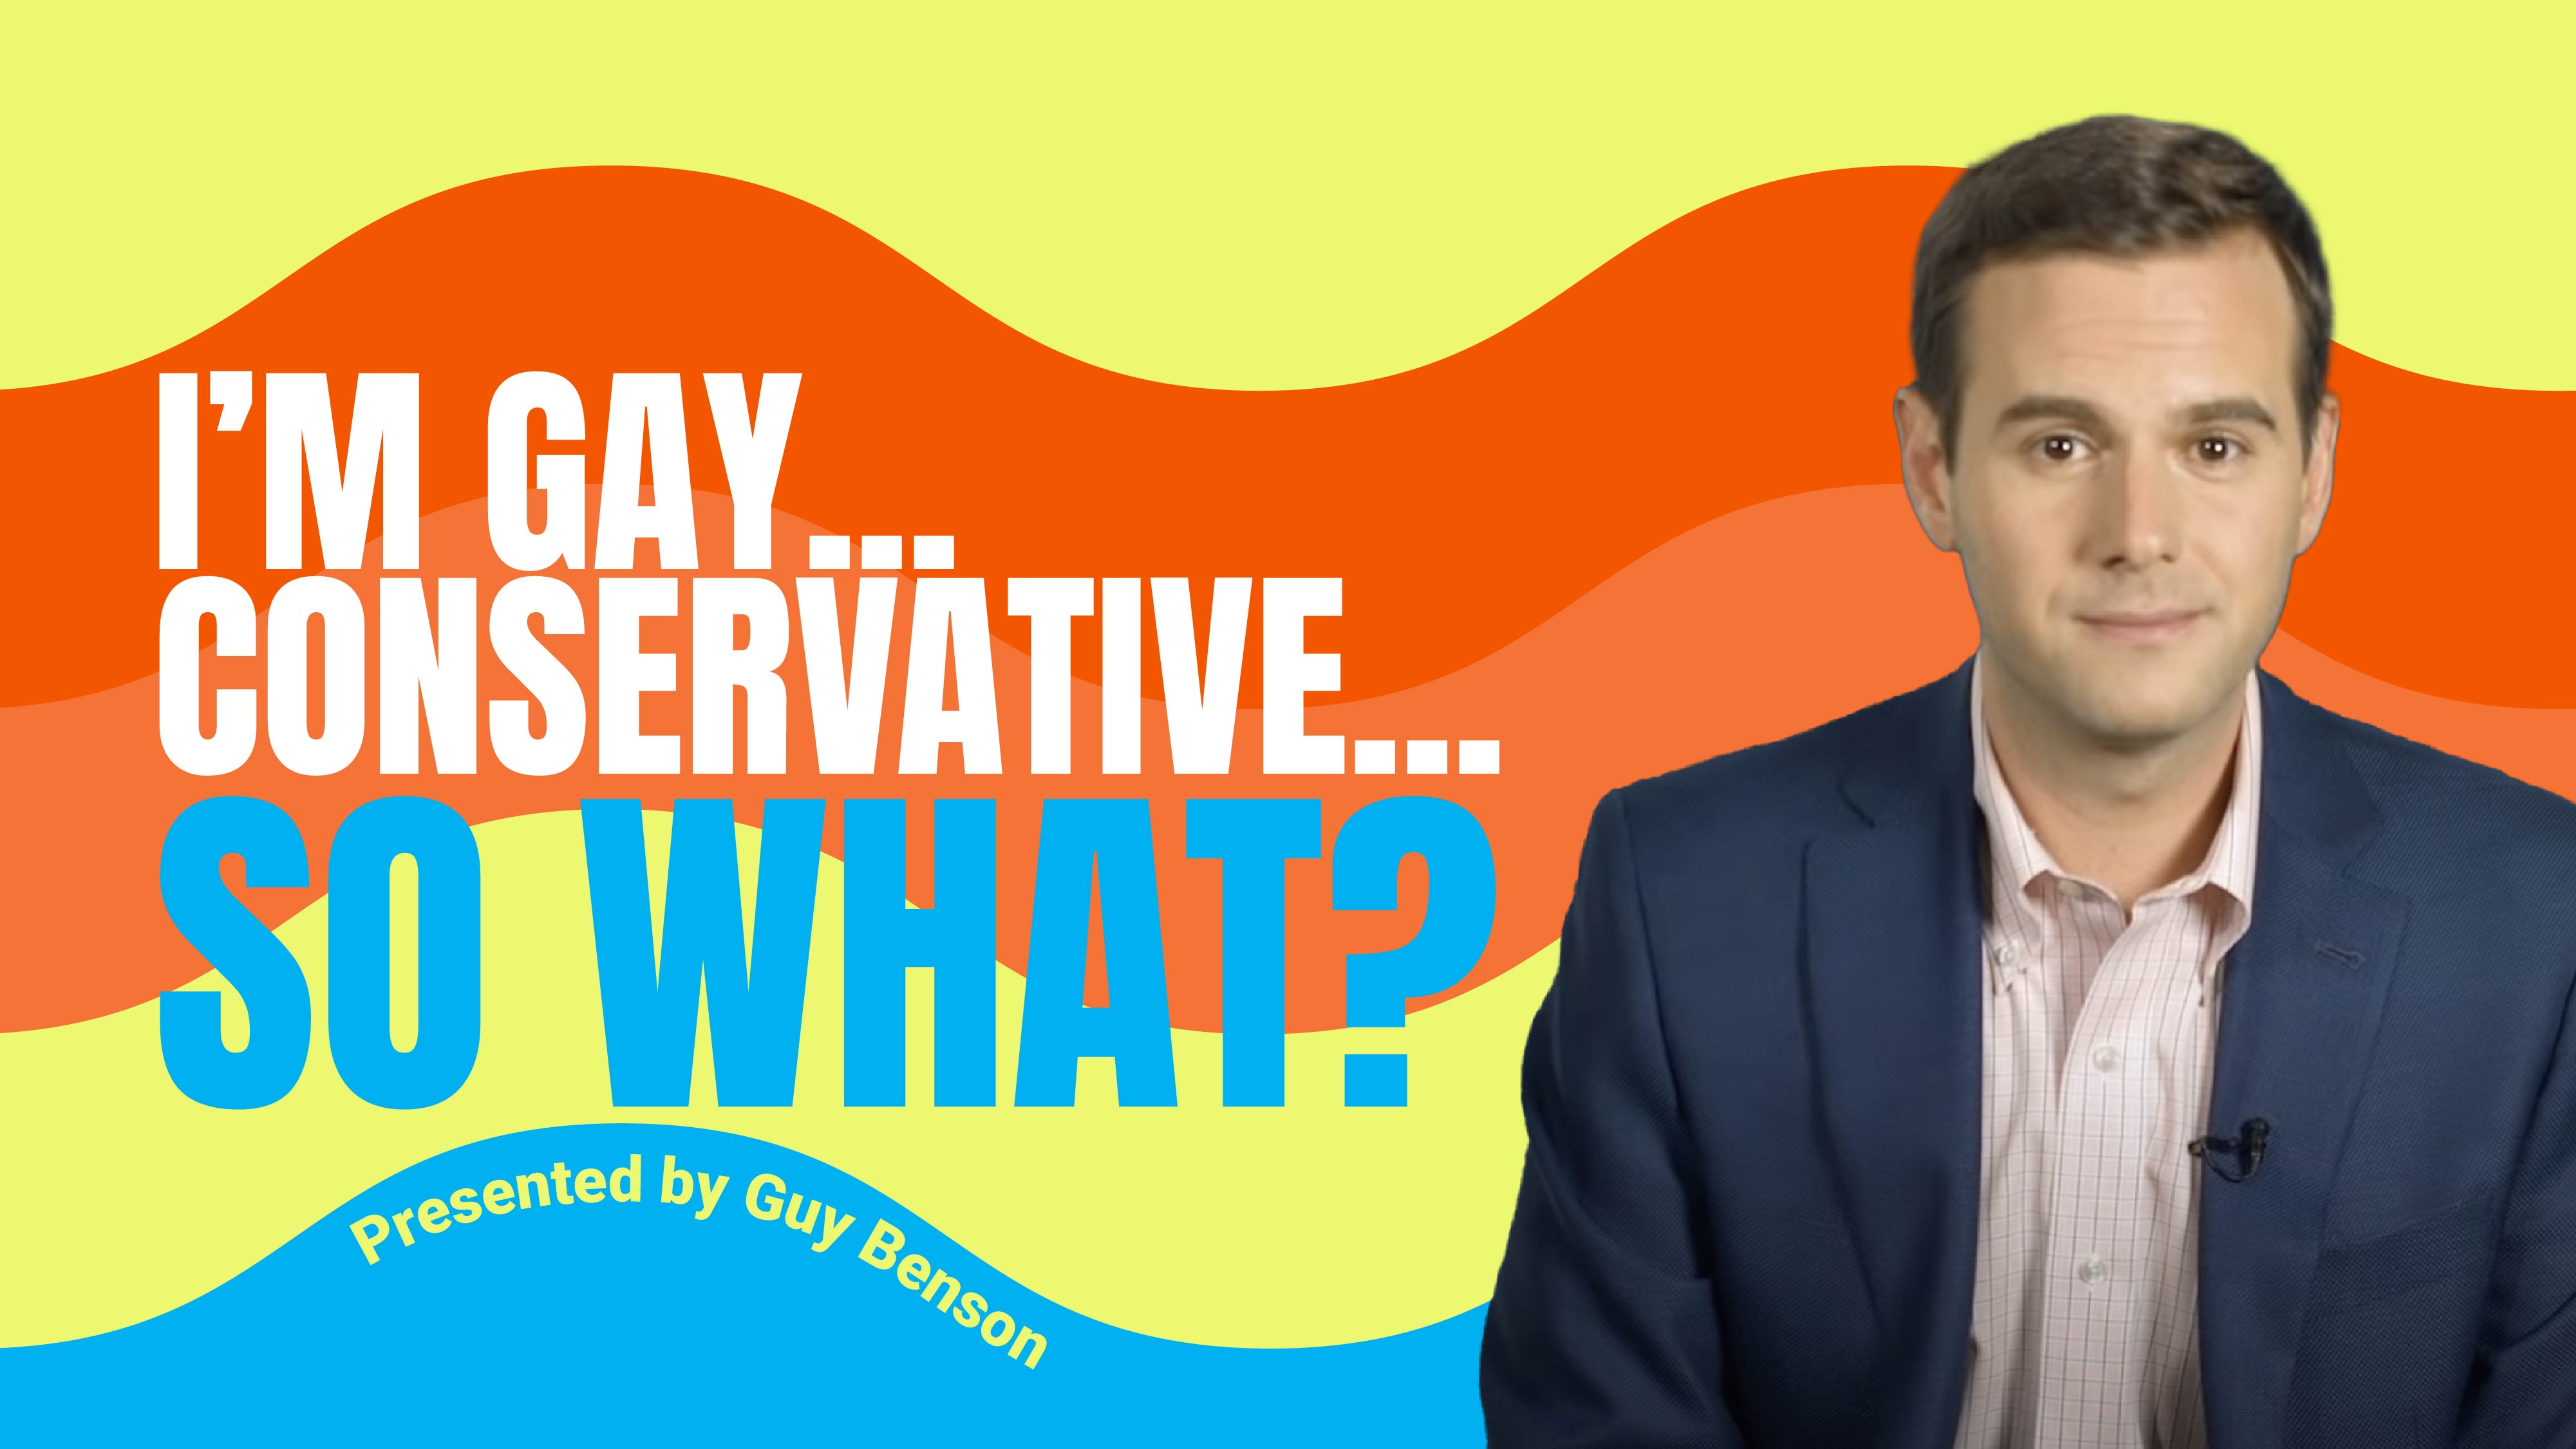 dating a conservative guy